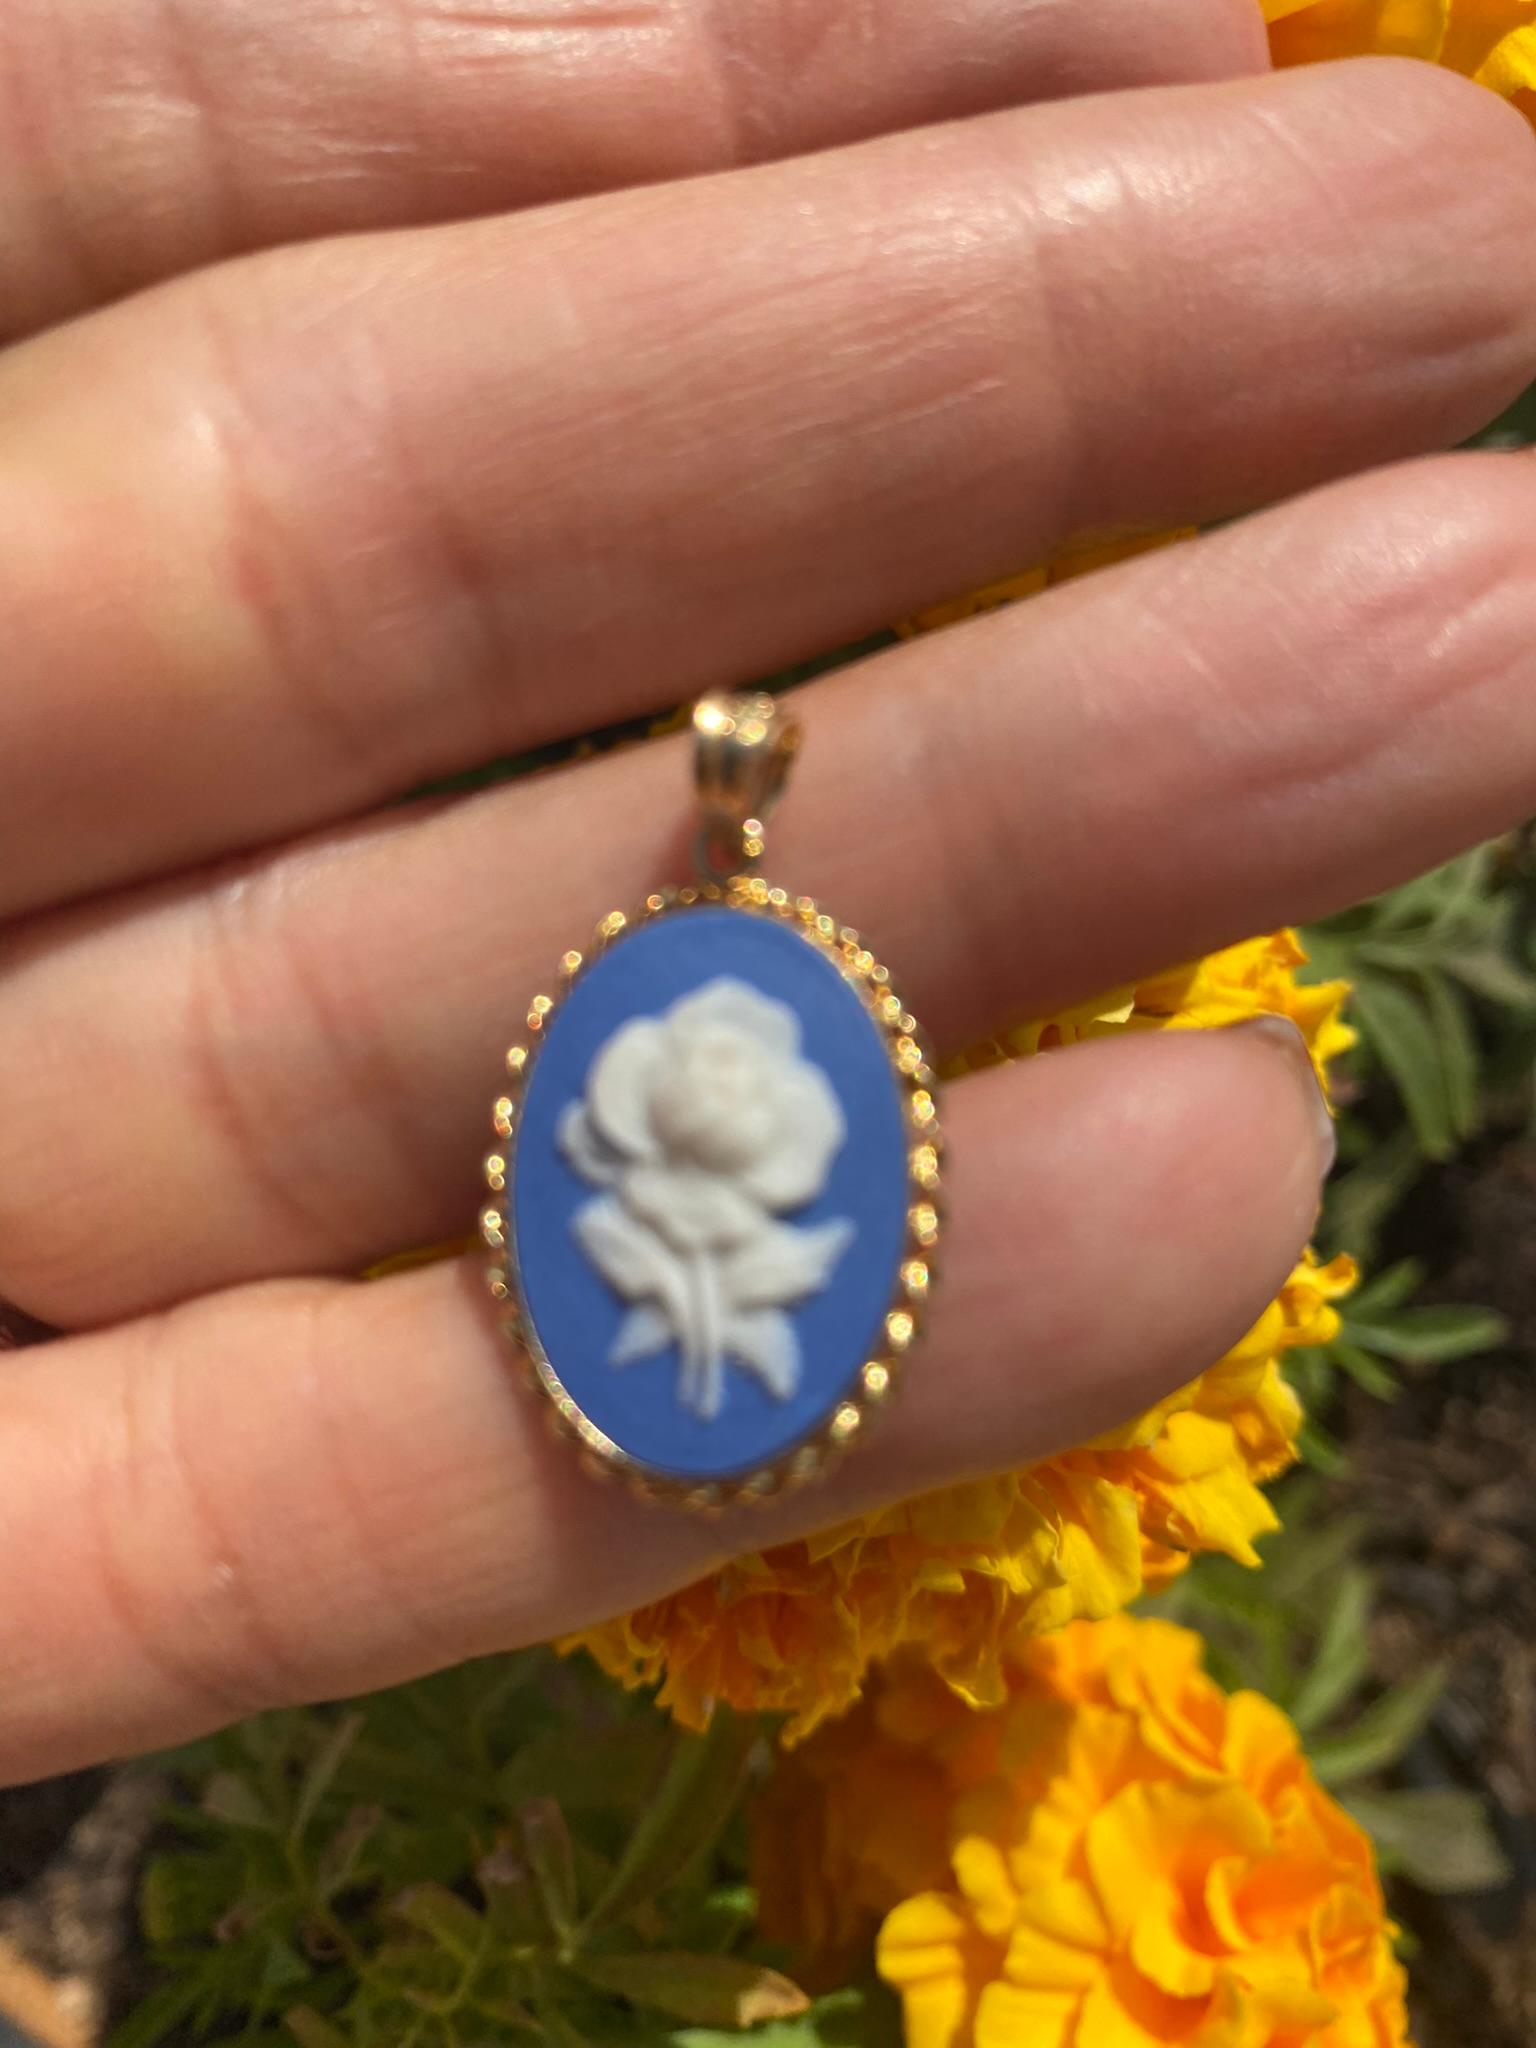 Blue Bisque Floral Charm Pendant 14 Karat Yellow Gold

Rope textured edge pendant measuring 3//4 in length (without the bail) by 1/2 inches in width.
A very sweet gift for your Rose! Wear as a charm or a pendant

GIA Gemologist inspected and